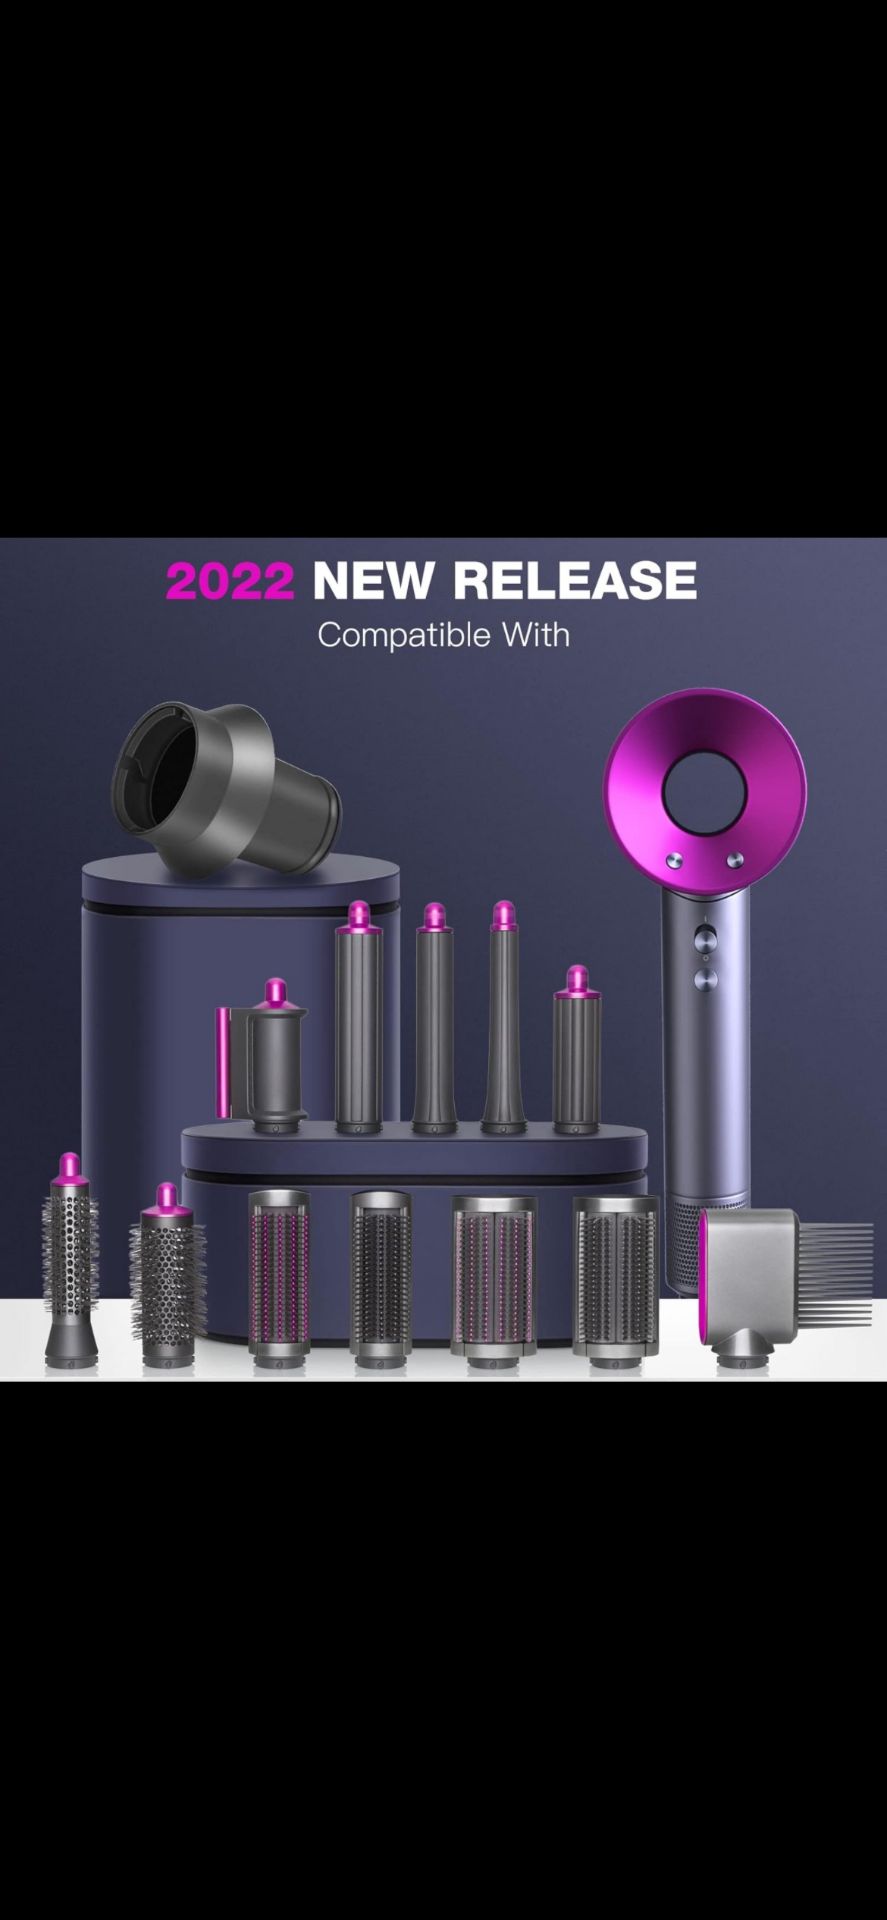 15 x Multifunctional 2in1 Hairdryer Accessory, Compatible with Dyson Supersonic - Image 2 of 4